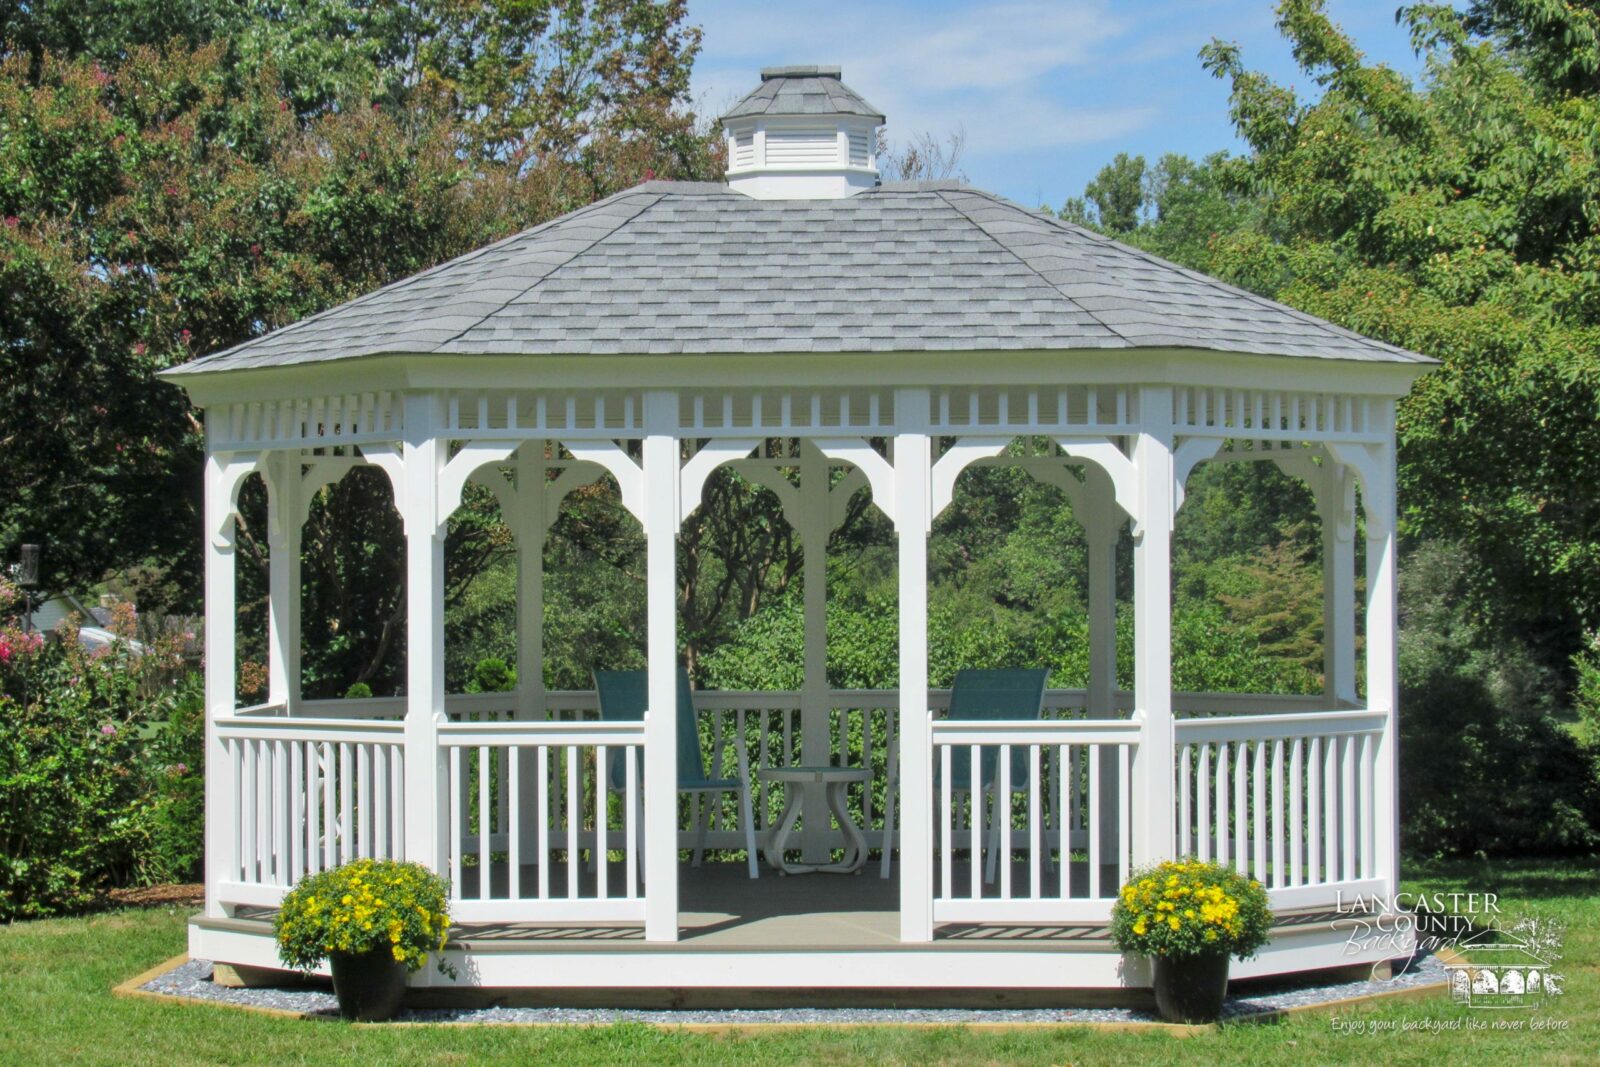 Gazebos vs Pergolas vs Patio Covers: What's the Difference?